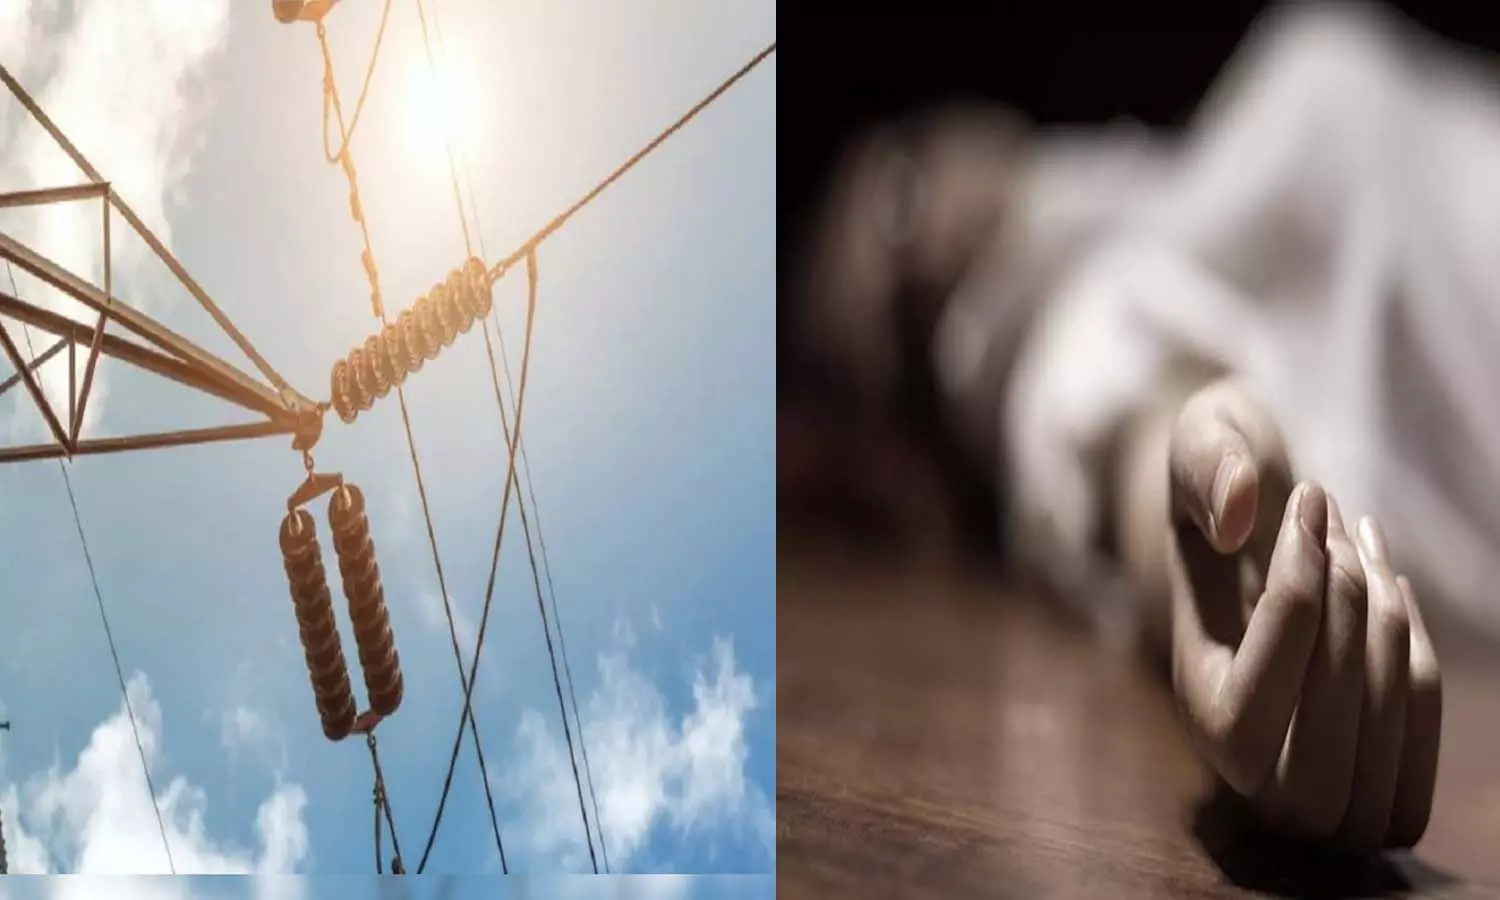 High tension wire fell on two women working in the field in Etah district, painful death